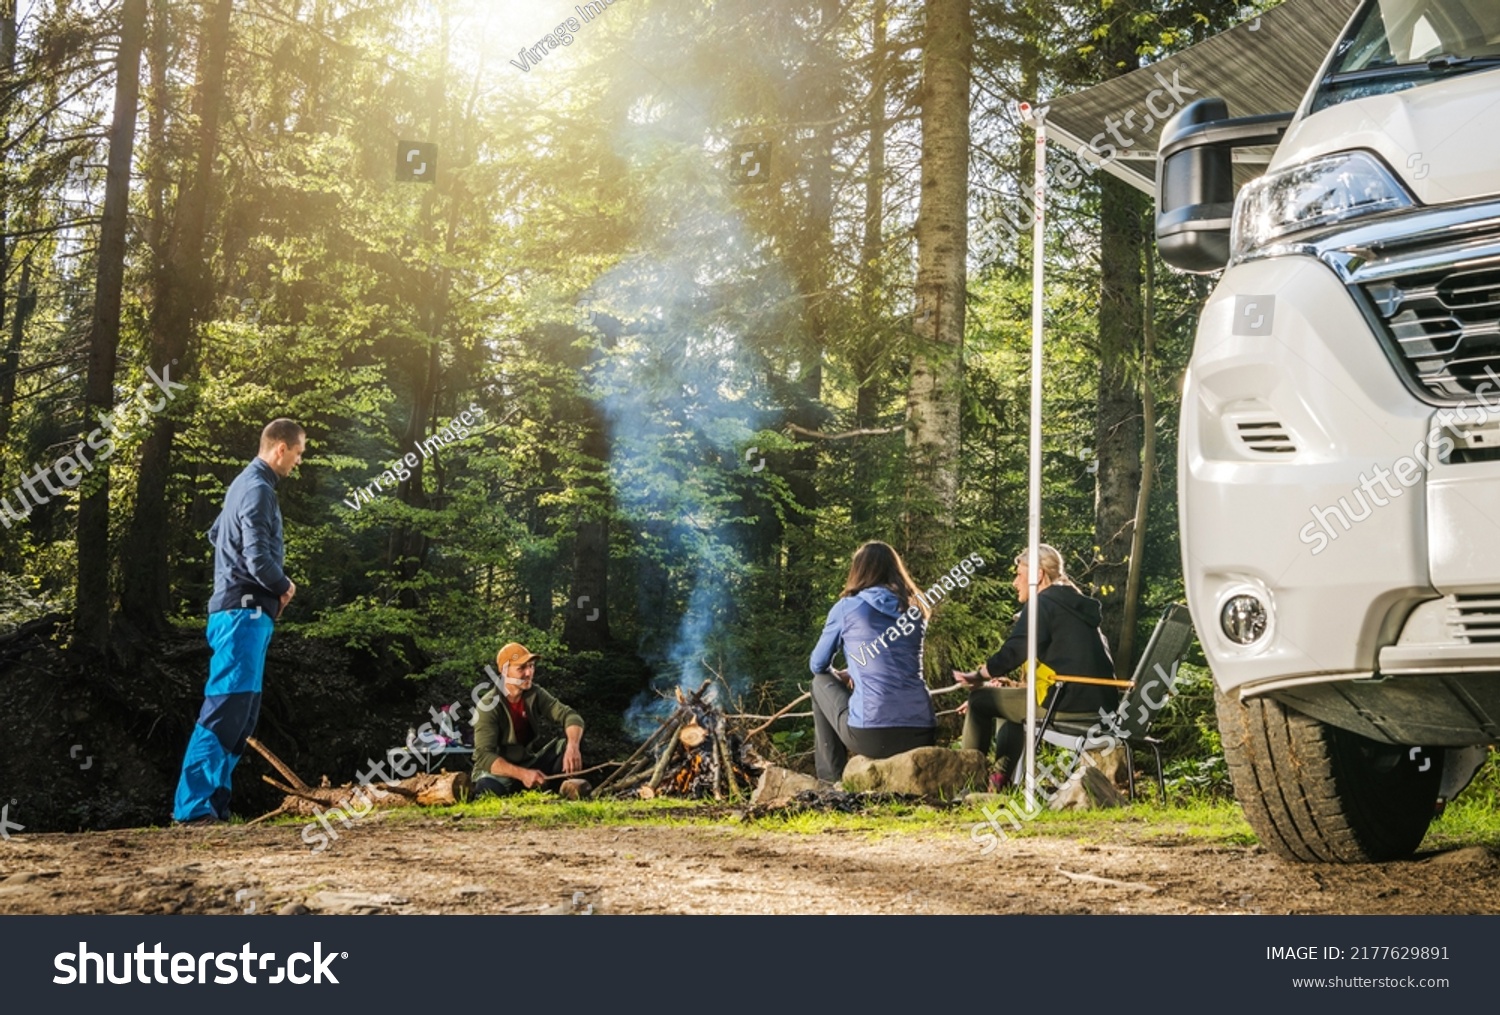 Four Adult Caucasian Friends in Their 40s Hanging Out Next to Campfire During Wilderness Boondocking Camper Camping #2177629891